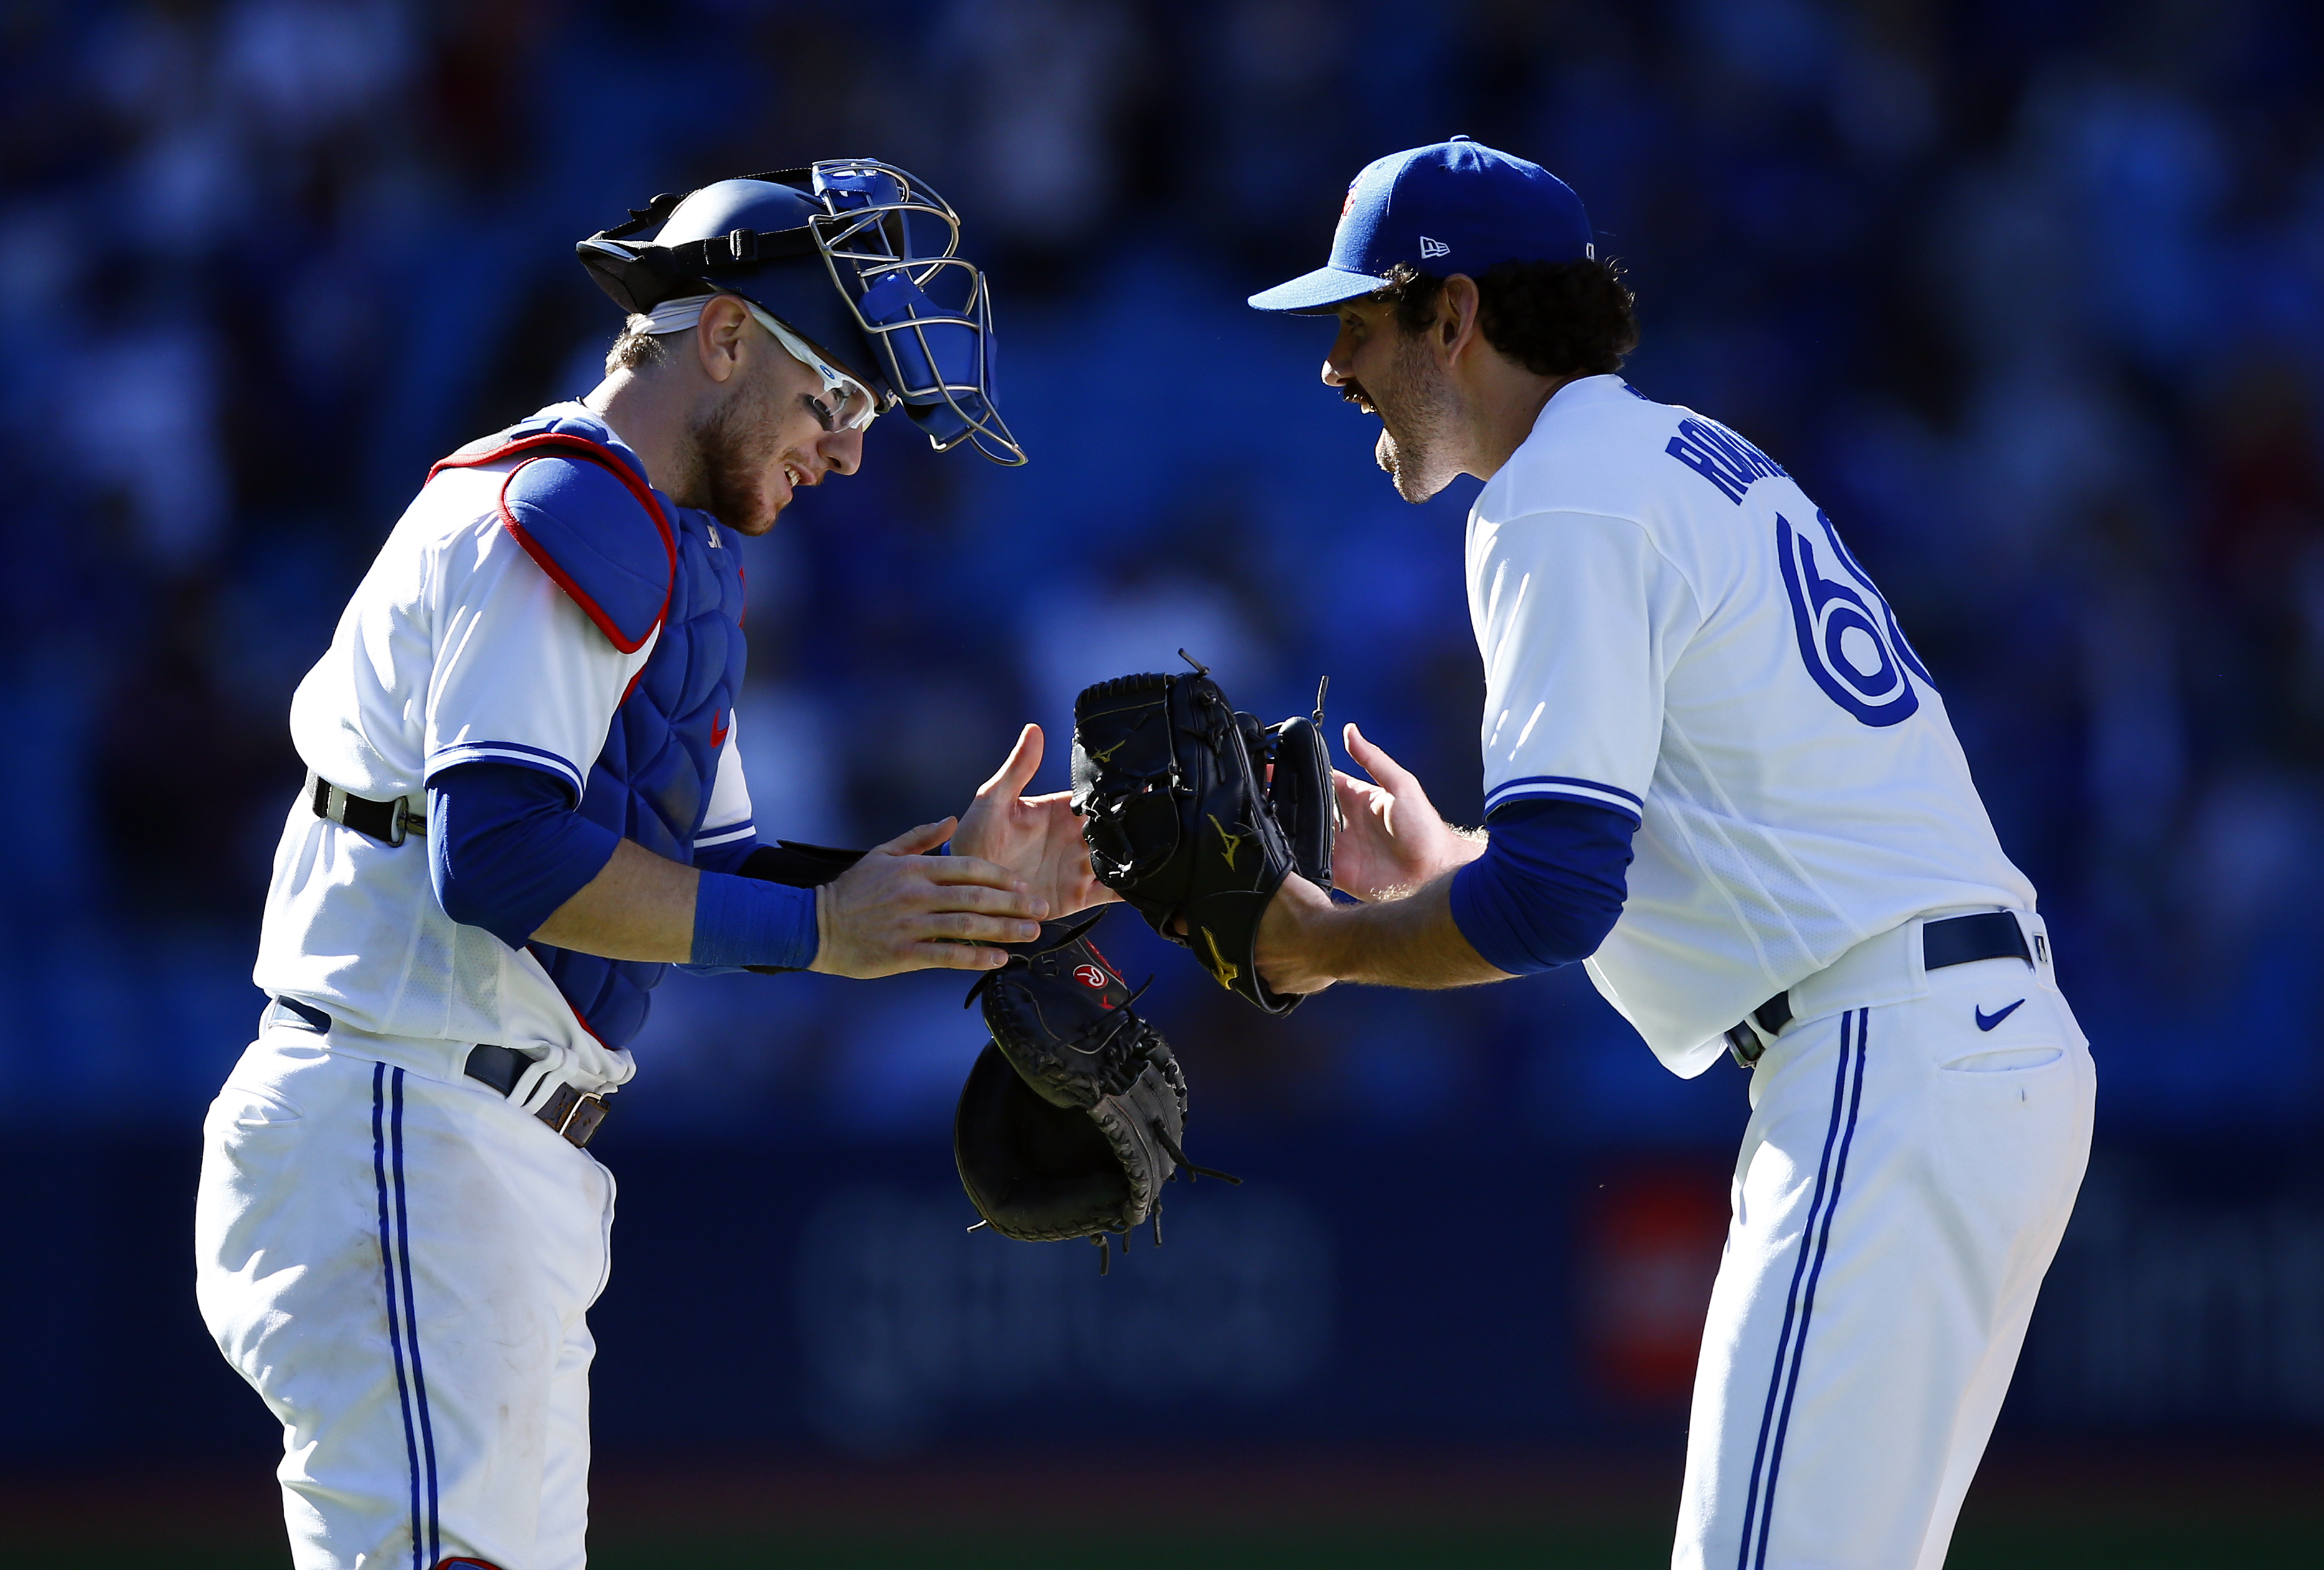 Toronto Blue Jays on X: Your AL leader in strikeouts? Kevin